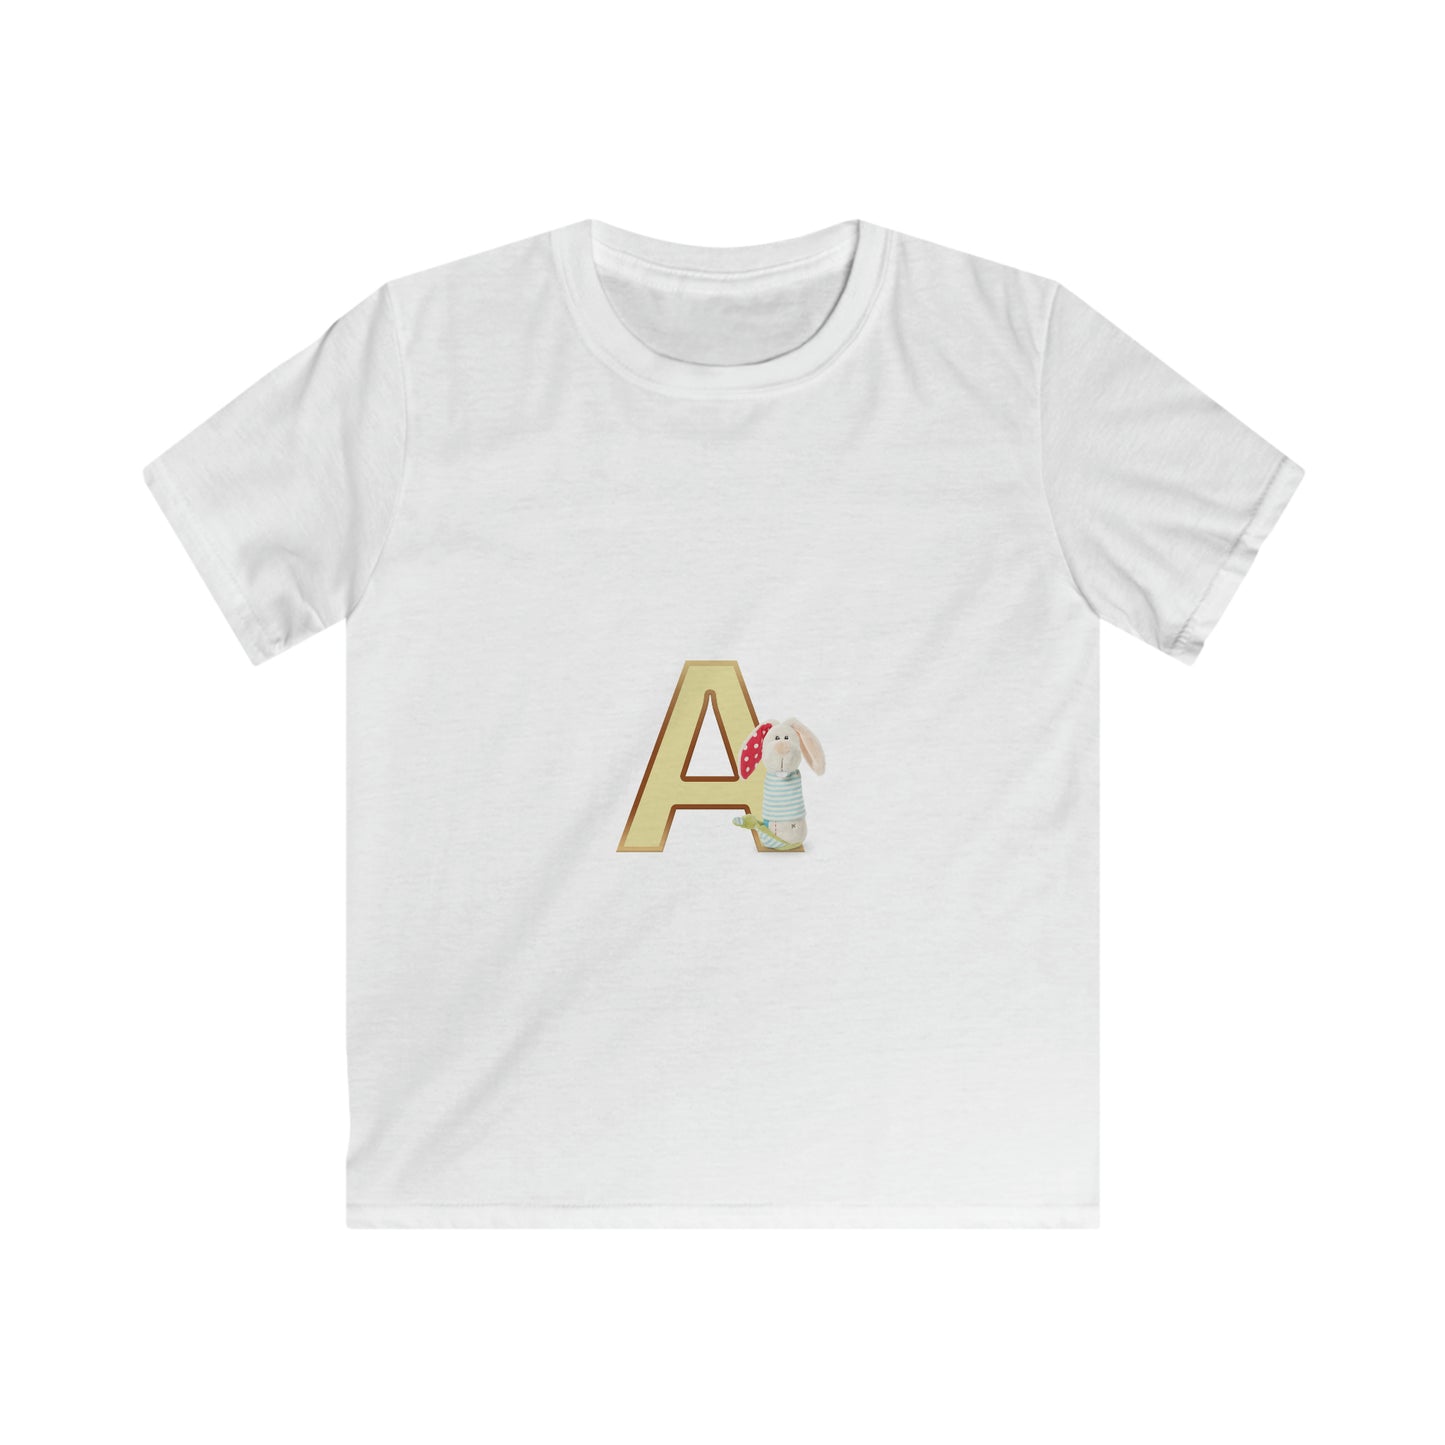 Kids Softstyle Tee, Letter A, Trending Kids Fashion, Comfortable Children's Clothing, Stylish Kids Apparel, Soft and Trendy Kids Tees, Letter A Design for Kids, Cool and Cozy Children's Shirts.